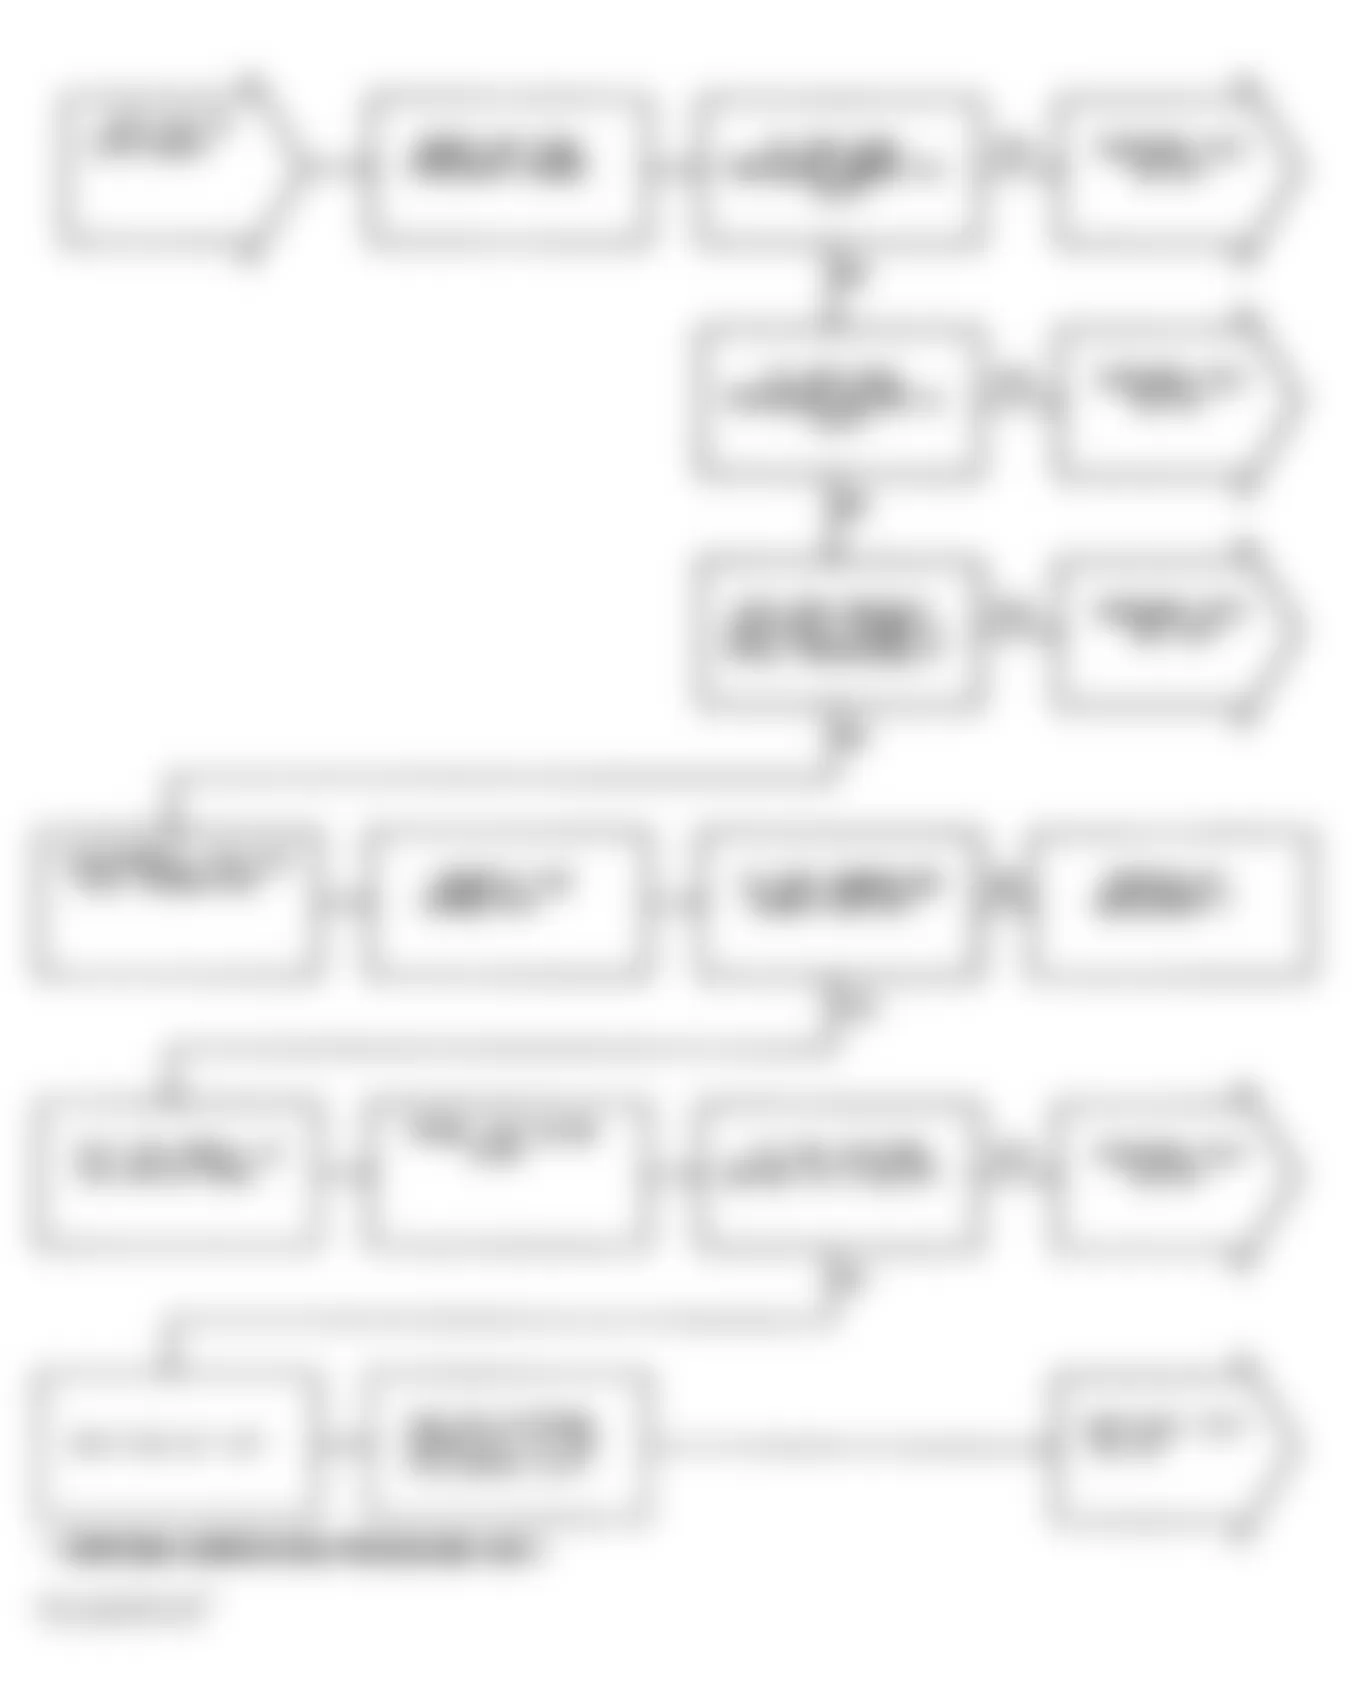 Chrysler Imperial 1991 - Component Locations -  Test NS-3A: Flowchart (2 of 3)